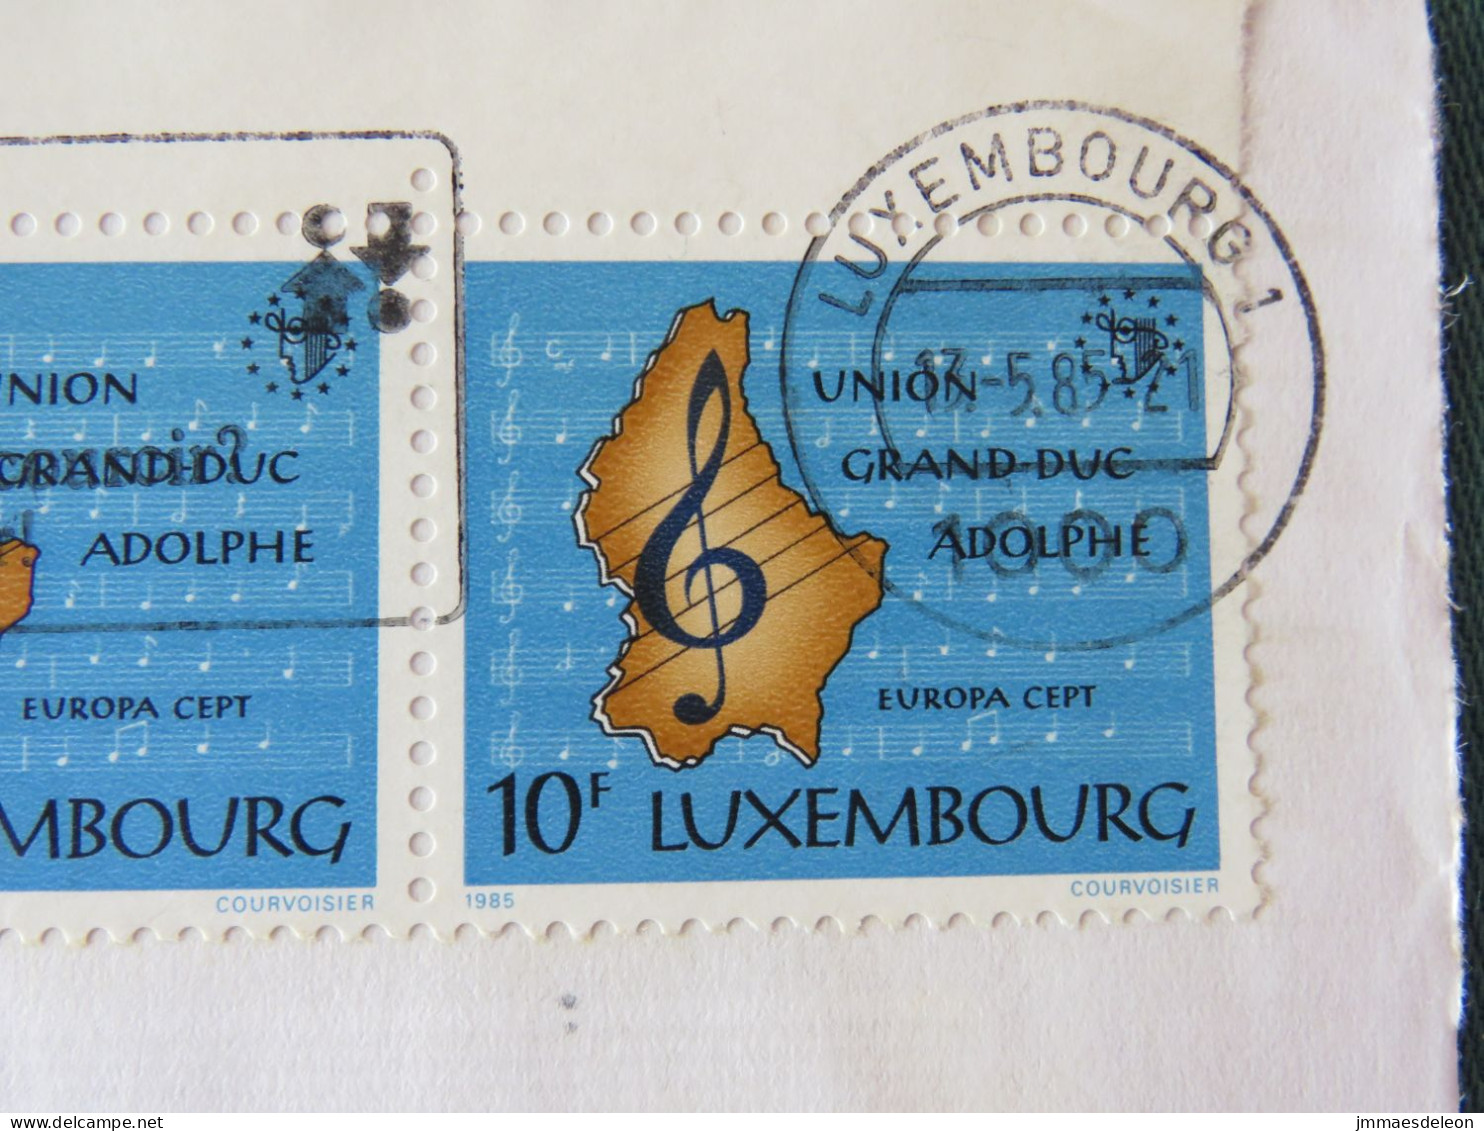 Luxembourg 1985 Cover To England - Map Music - Smoking Slogan - Covers & Documents